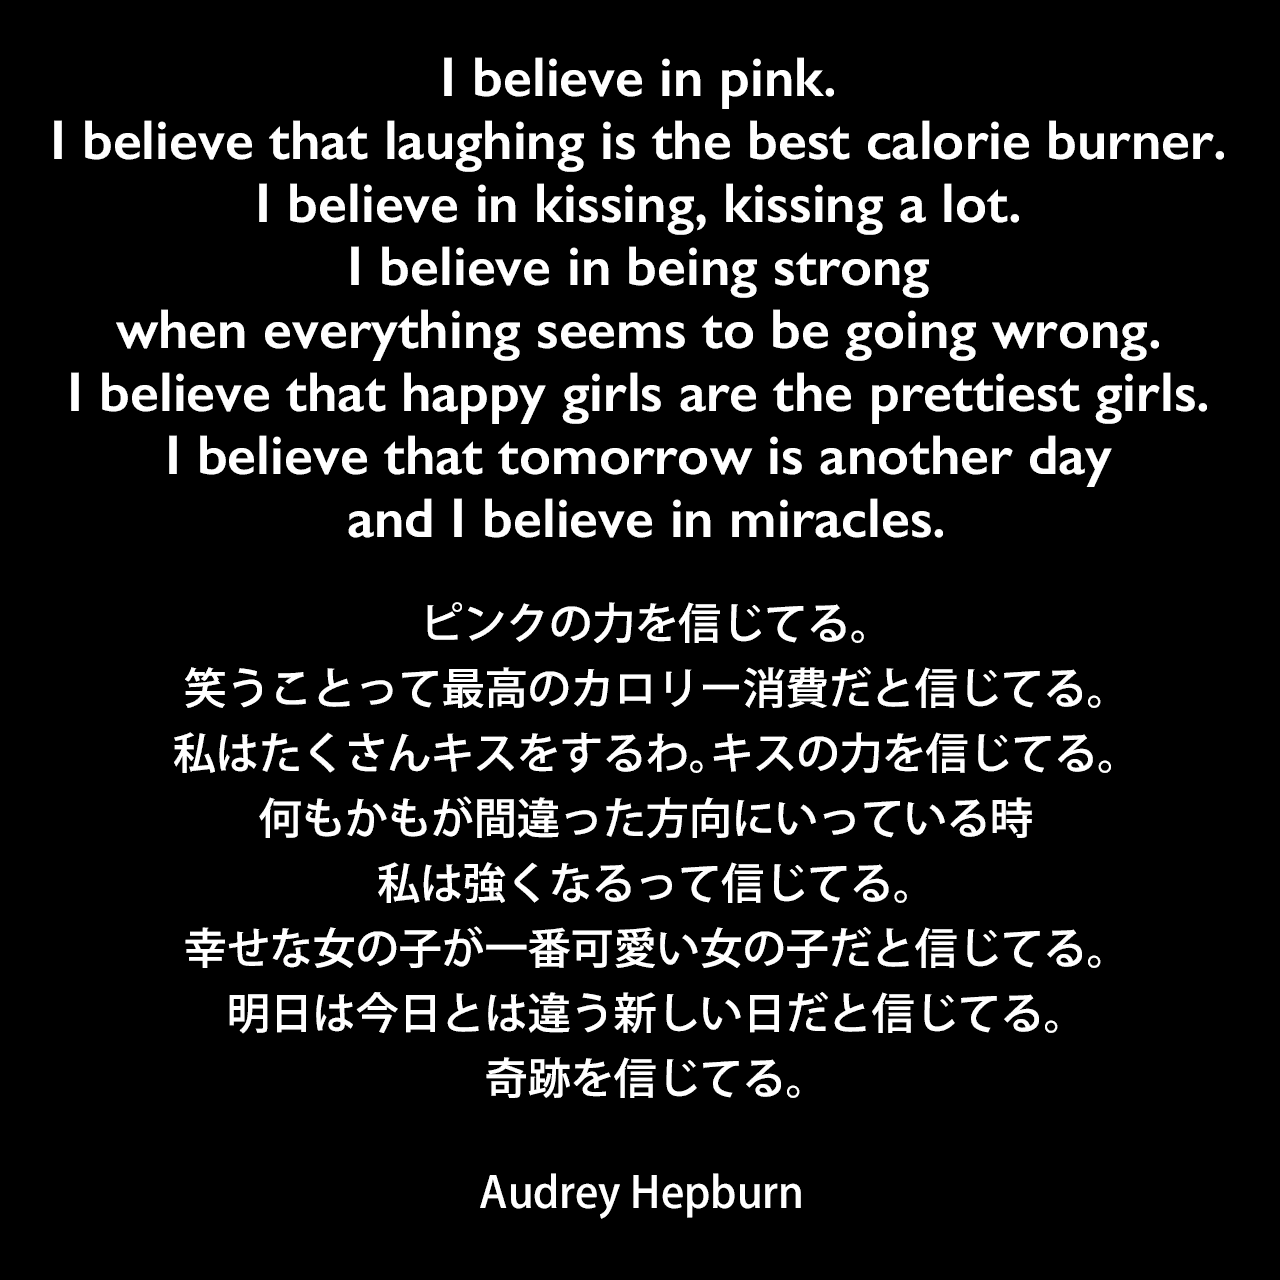 I believe in pink. I believe that laughing is the best calorie burner. I believe in kissing, kissing a lot. I believe in being strong when everything seems to be going wrong. I believe that happy girls are the prettiest girls. I believe that tomorrow is another day and I believe in miracles.ピンクの力を信じてる。笑うことって最高のカロリー消費だと信じてる。私はたくさんキスをするわ。キスの力を信じてる。何もかもが間違った方向にいっている時、私は強くなるって信じてる。幸せな女の子が一番可愛い女の子だと信じてる。明日は今日とは違う新しい日だと信じてる。奇跡を信じてる。Audrey Hepburn